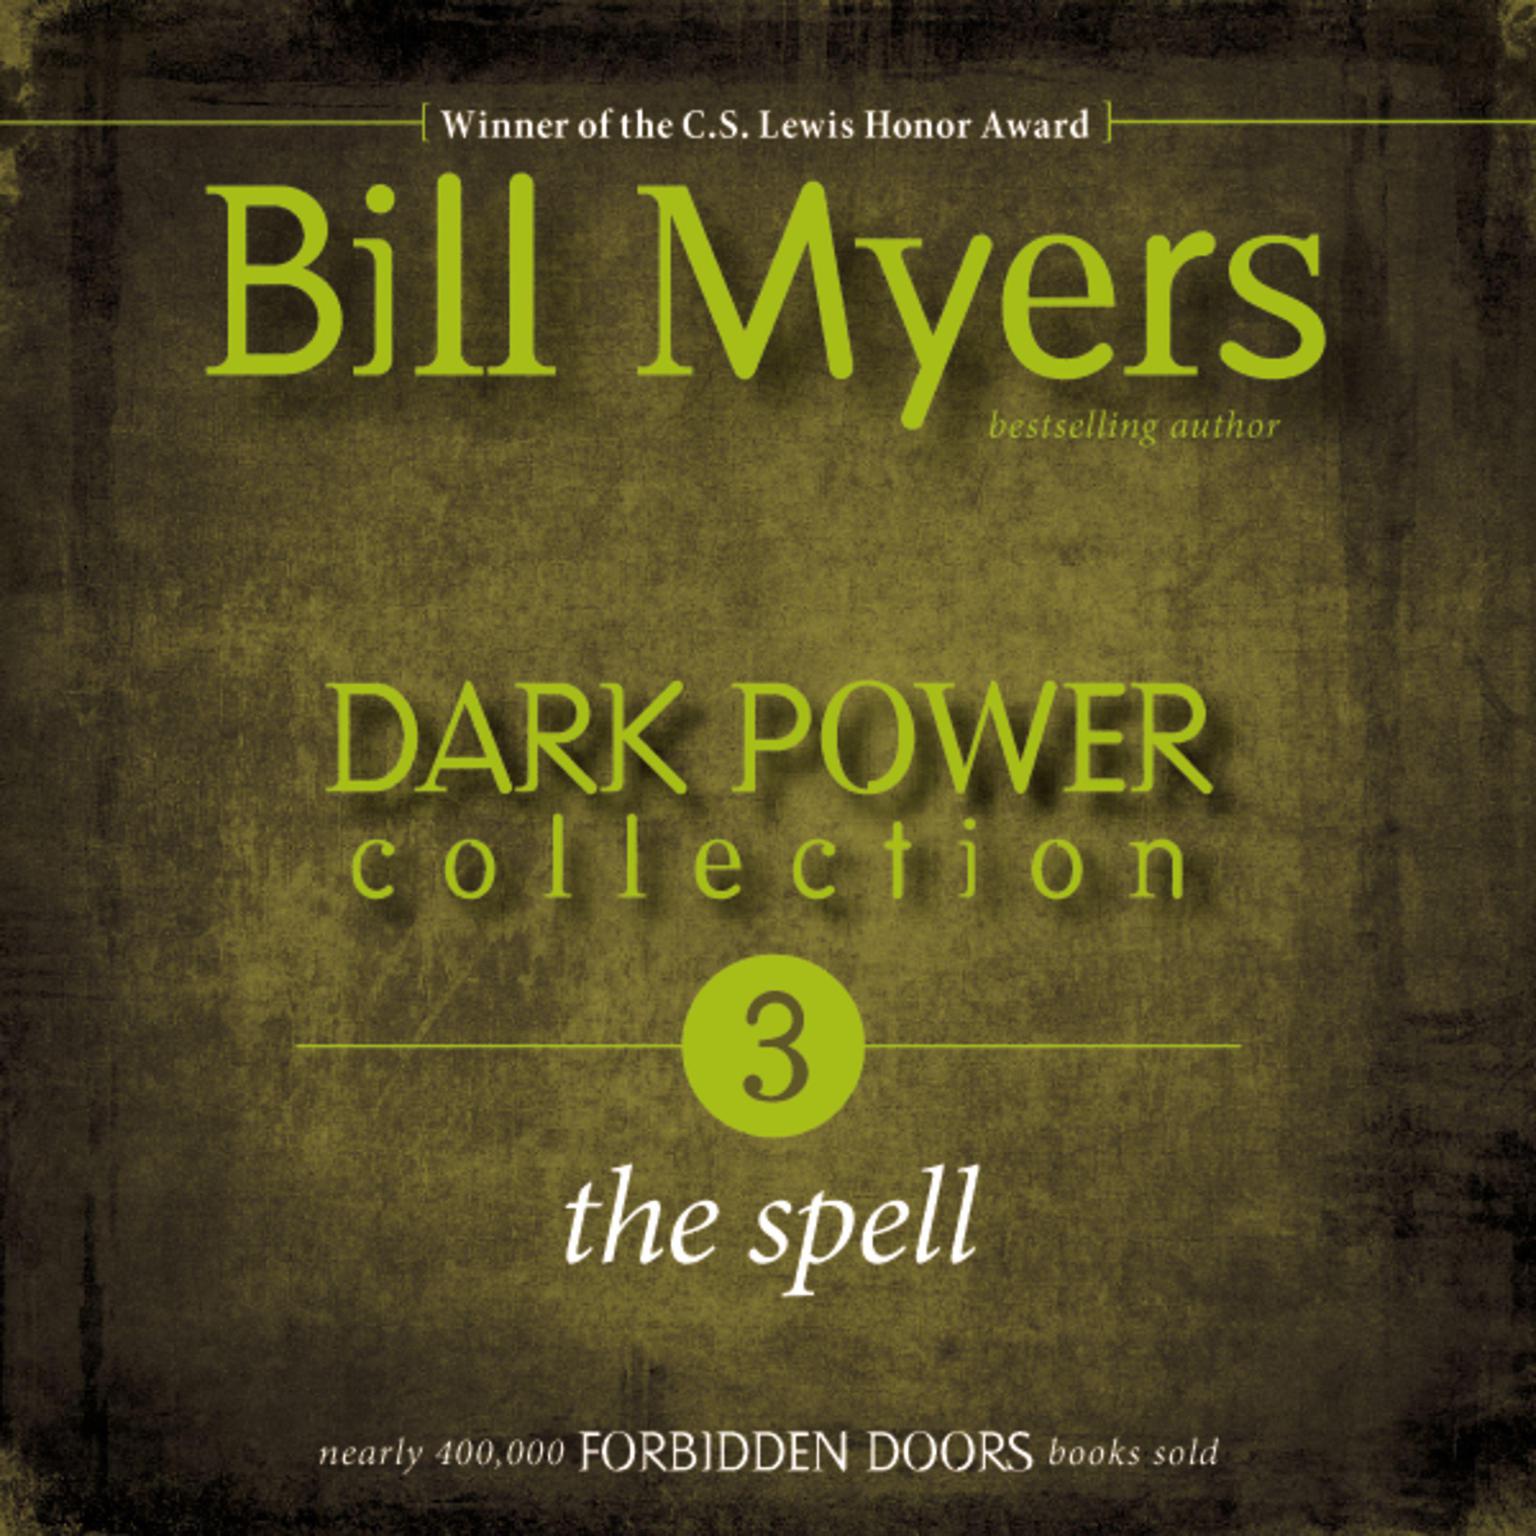 Dark Power Collection: The Spell Audiobook, by Bill Myers